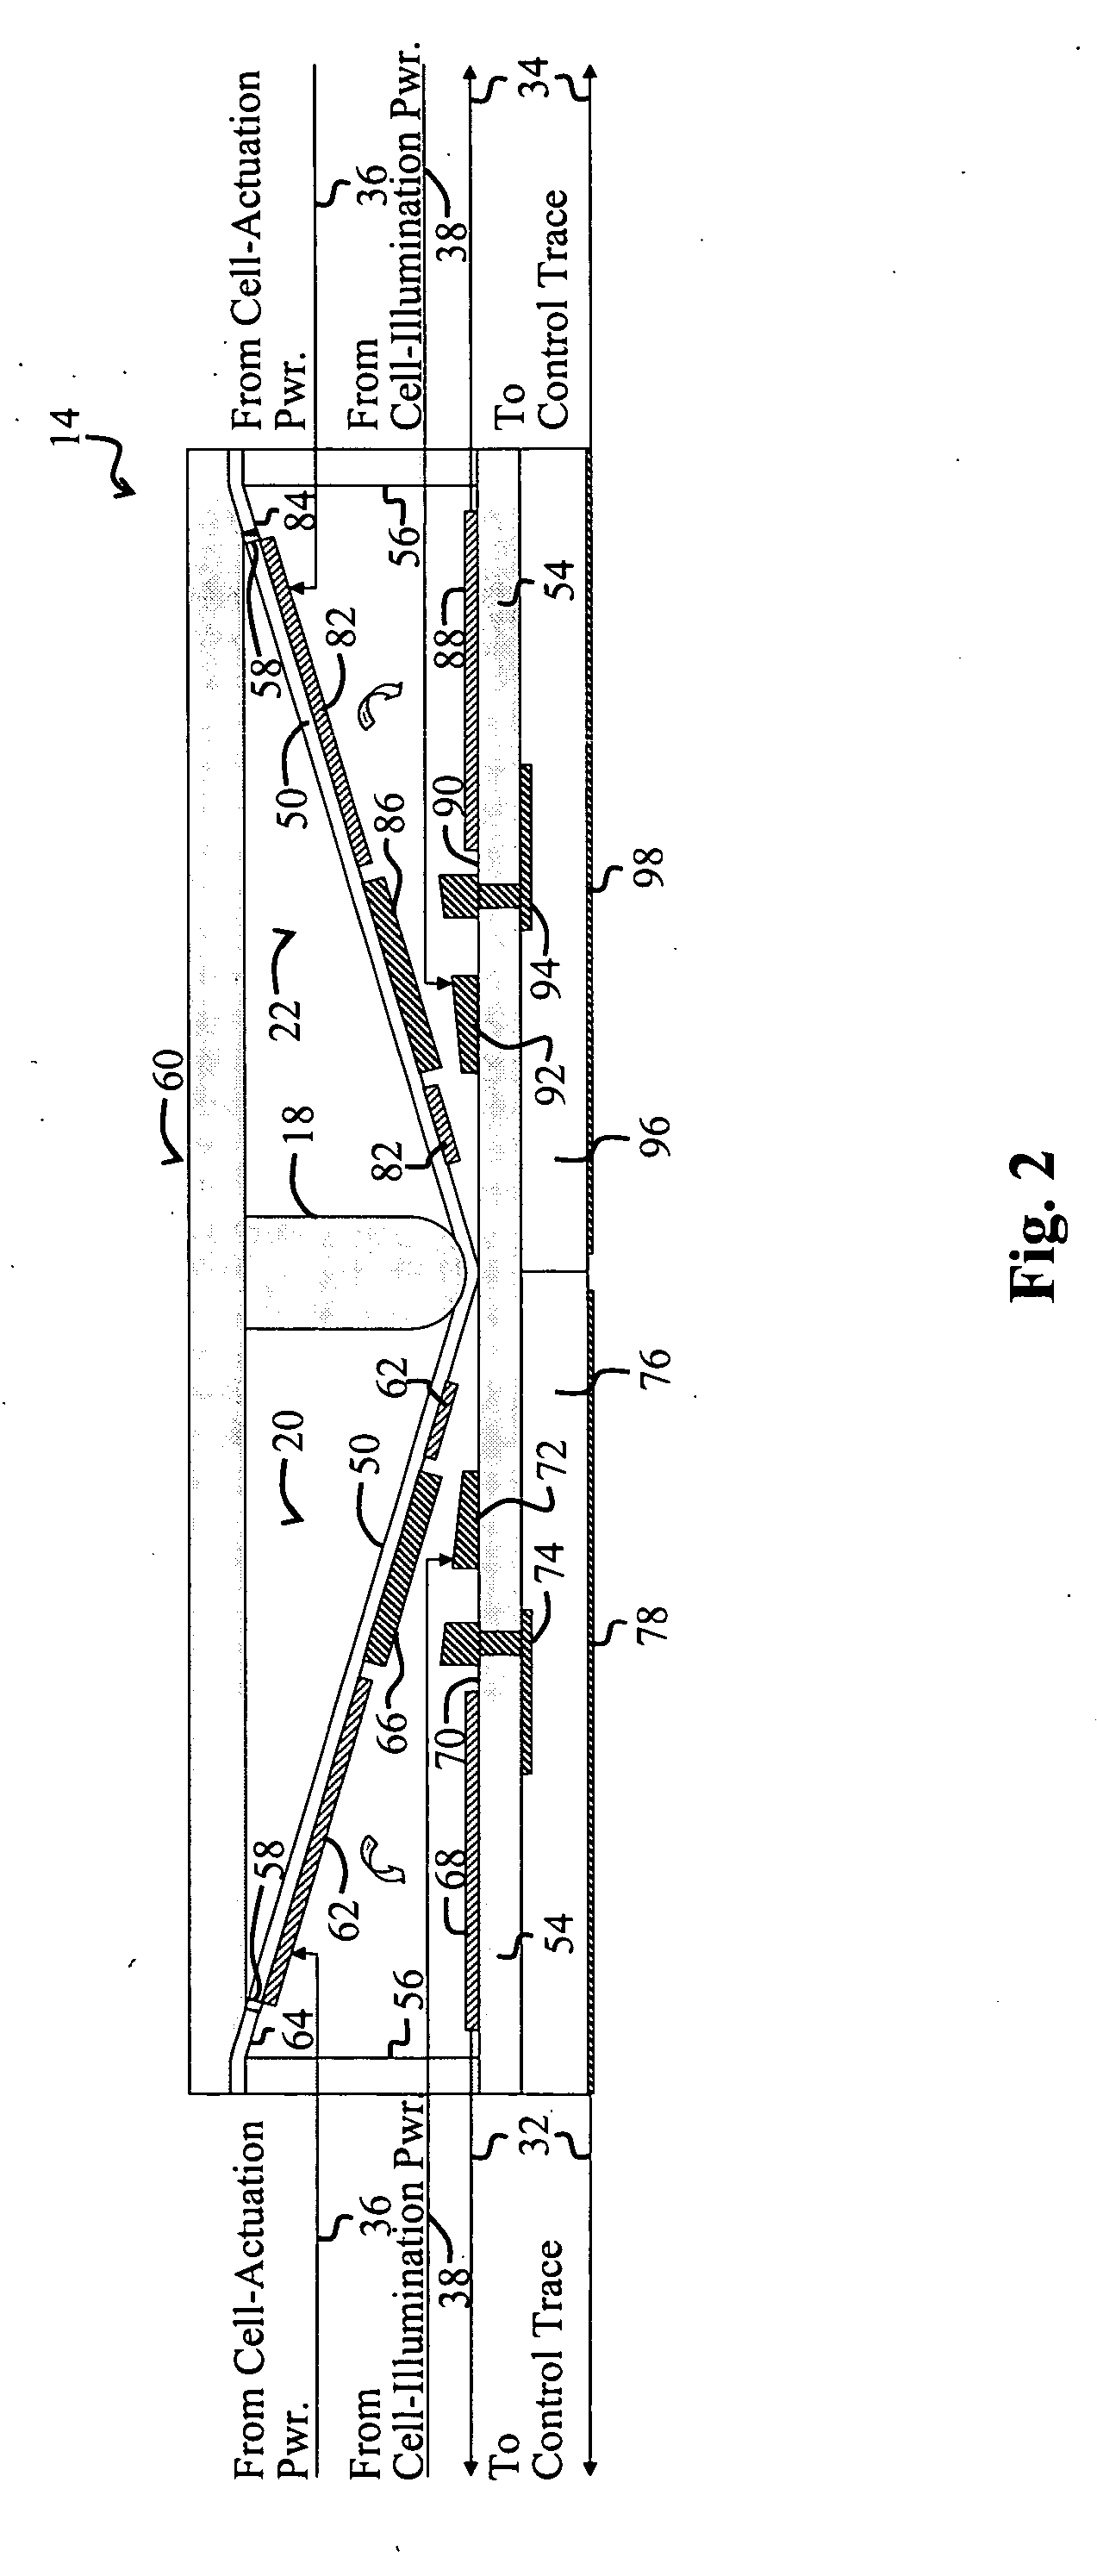 Picture element using microelectromechanical switch